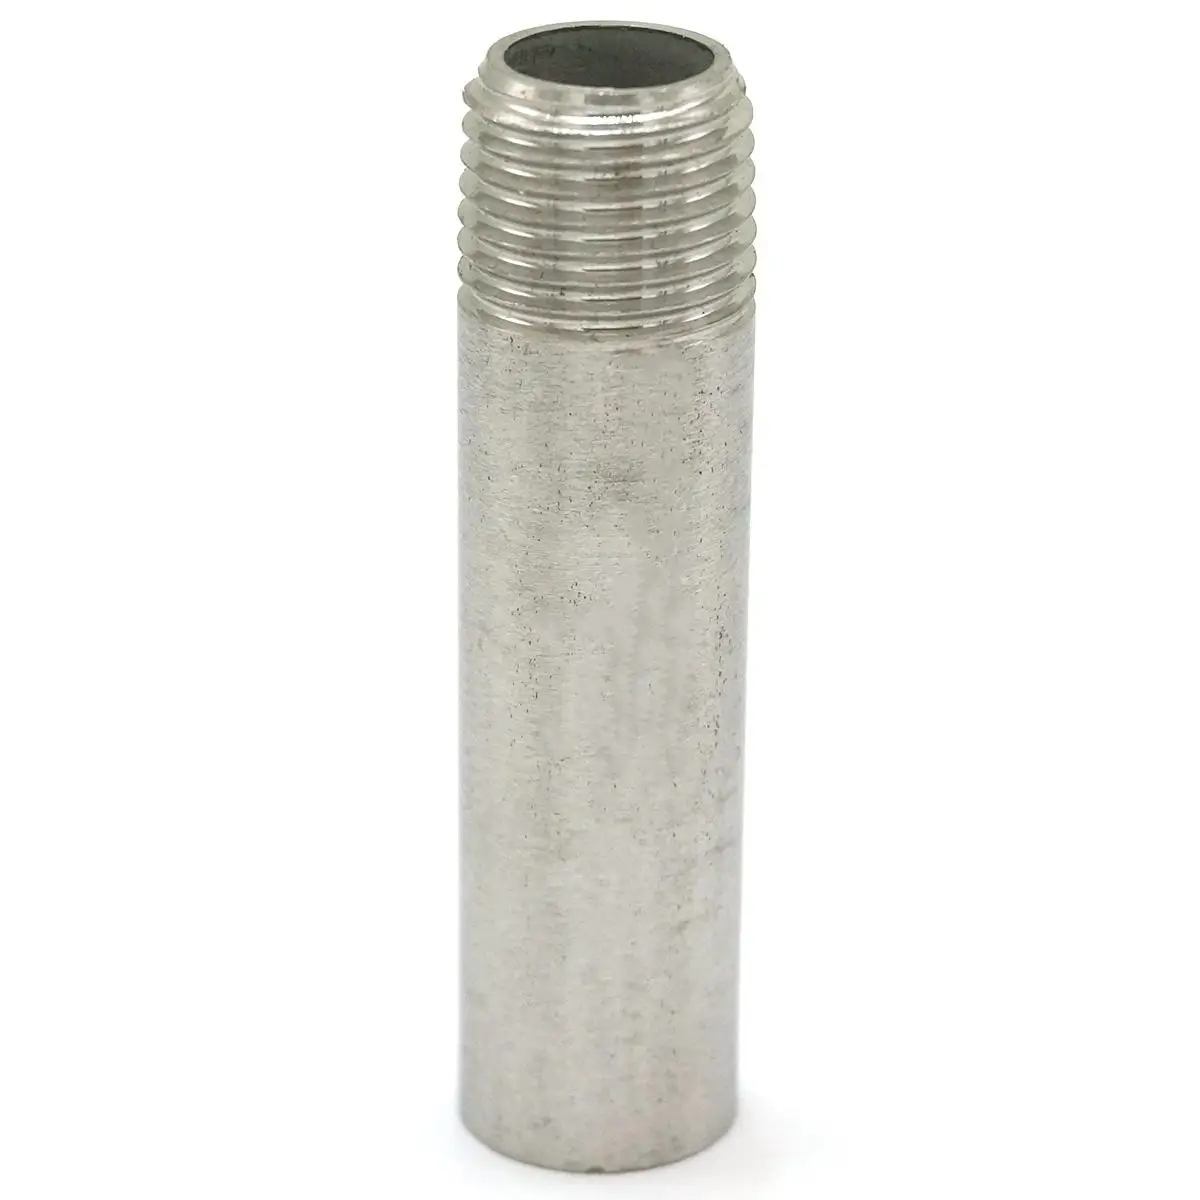 Stainless Nipple Close Male 1/4 Inch #14L318 